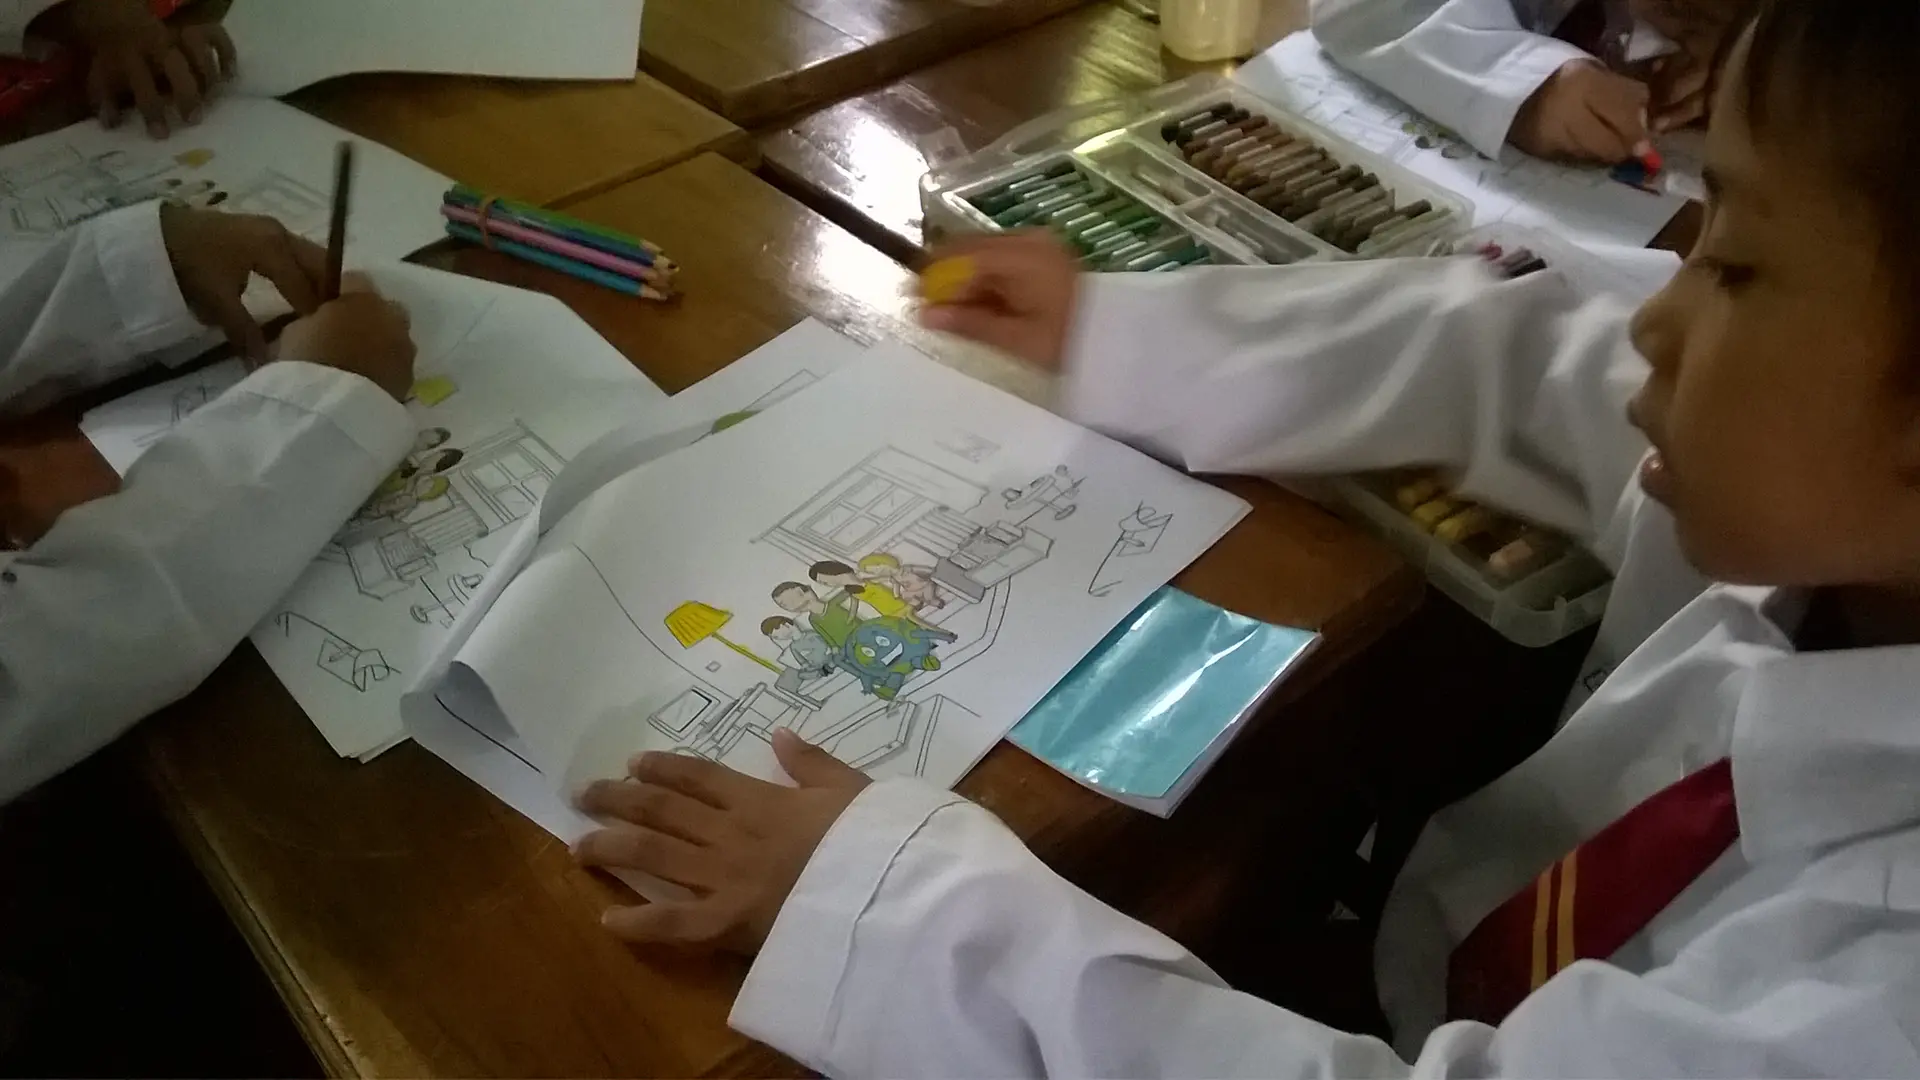 Children do some coloring activities as part of the program, to reinforce what they learn about sustainability.